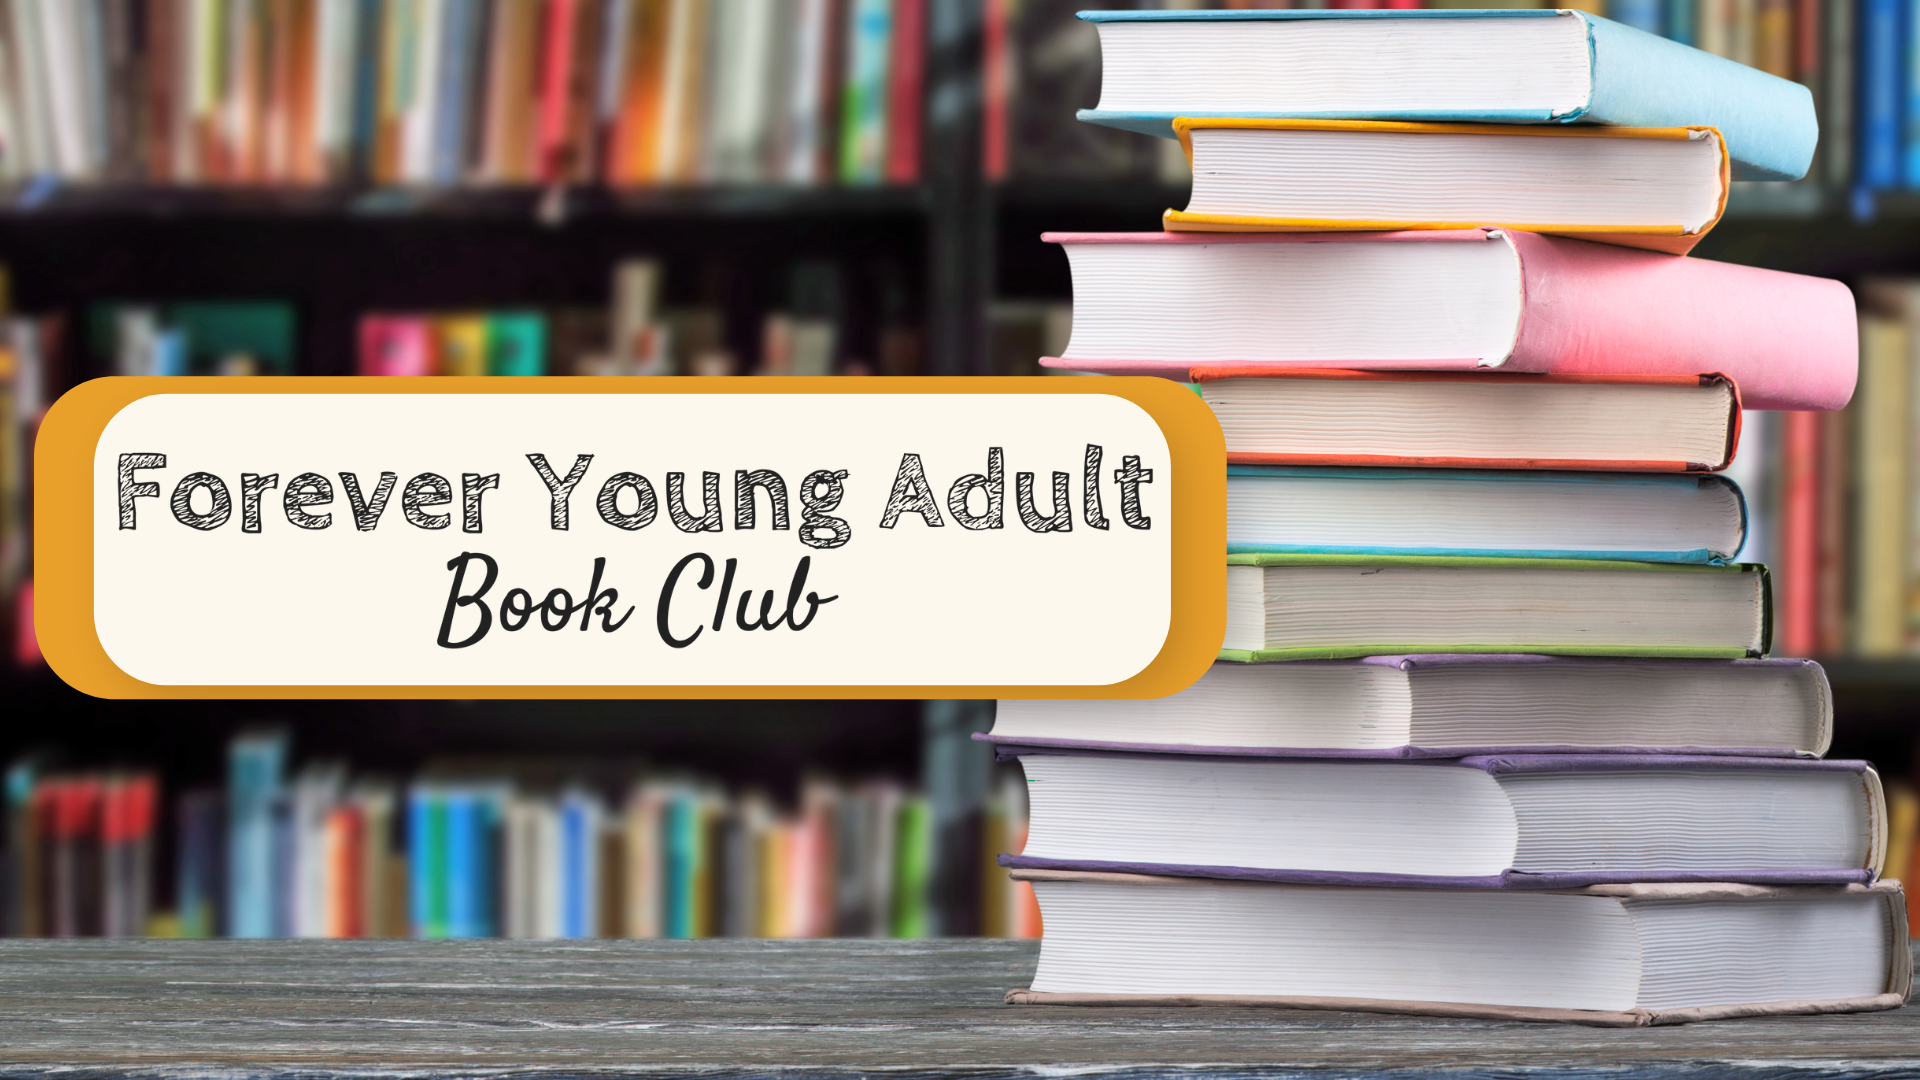 The Forever Young Adult Book Club Text in front of a stack of multicolored books sitting on a table